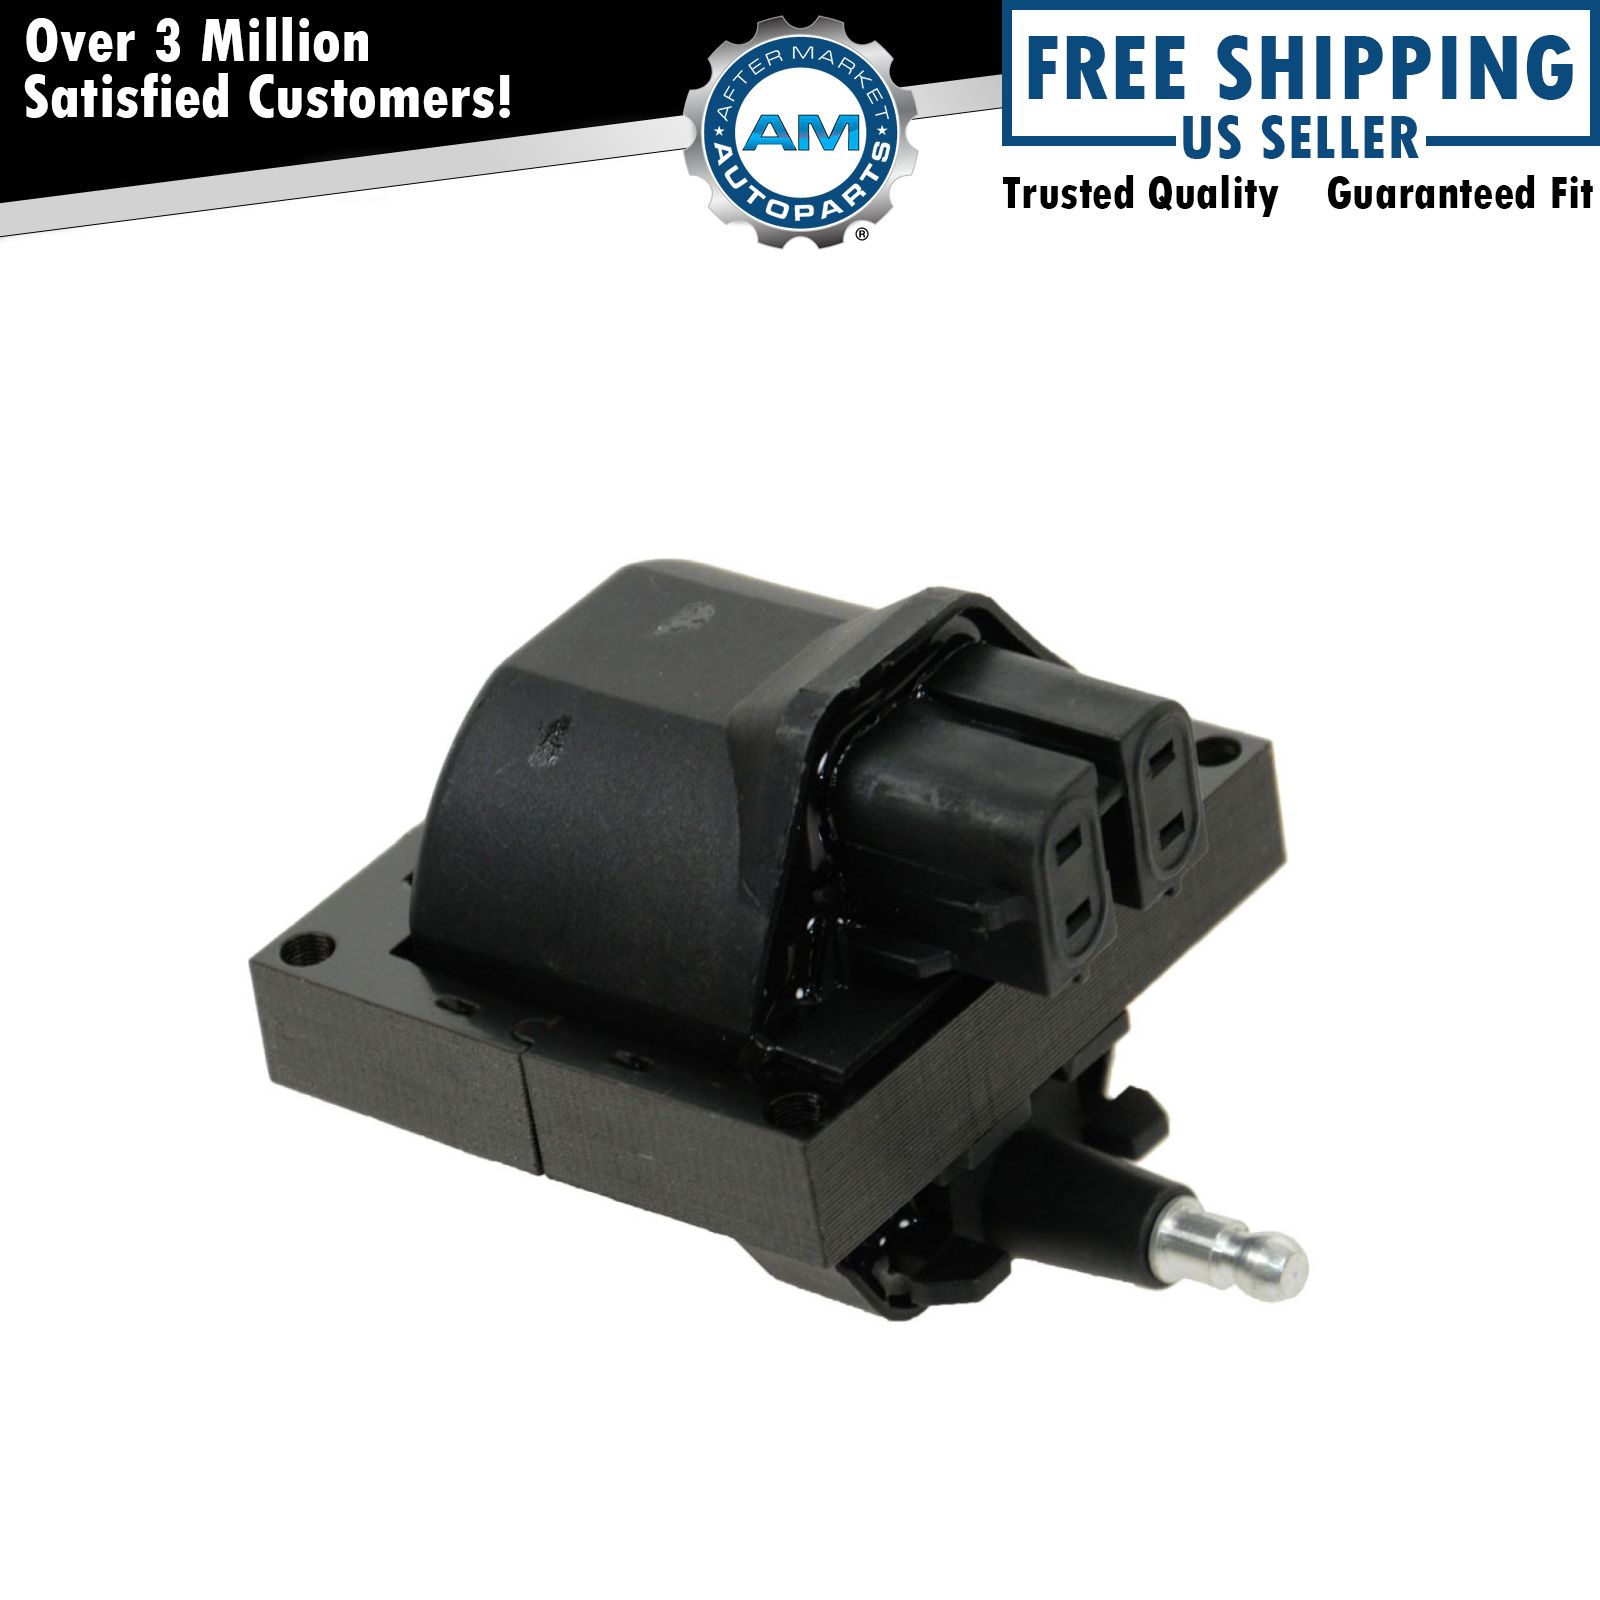 Ignition Spark Coil for GMC Pontiac Buick Chevy Pickup Truck Olds Cadillac